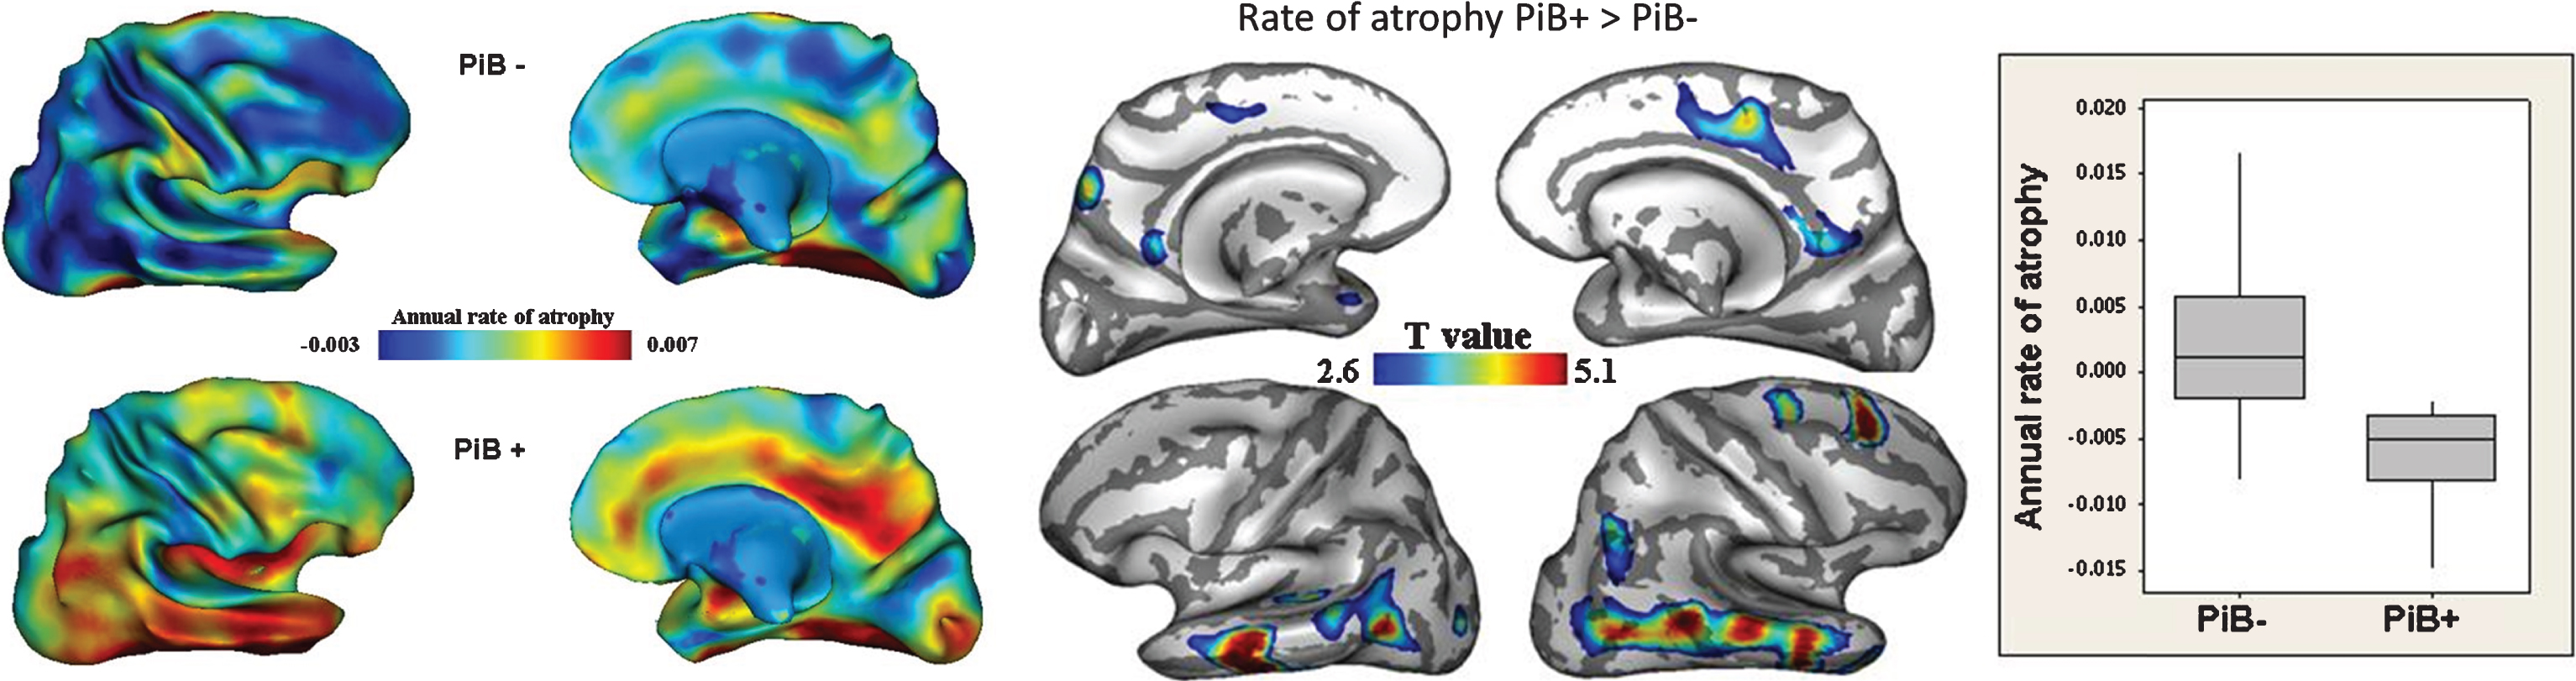 Comparison of the rate of atrophy over two years between cognitively intact older adults with (PIB+) and without (PIB-) Aβ deposition in their brain (as measured with PIB-PET) (Left). This study shows a greater rate of atrophy in PIB+ individuals, especially in the temporal neocortex and posterior and middle cingulate cortex (Right). From [35].